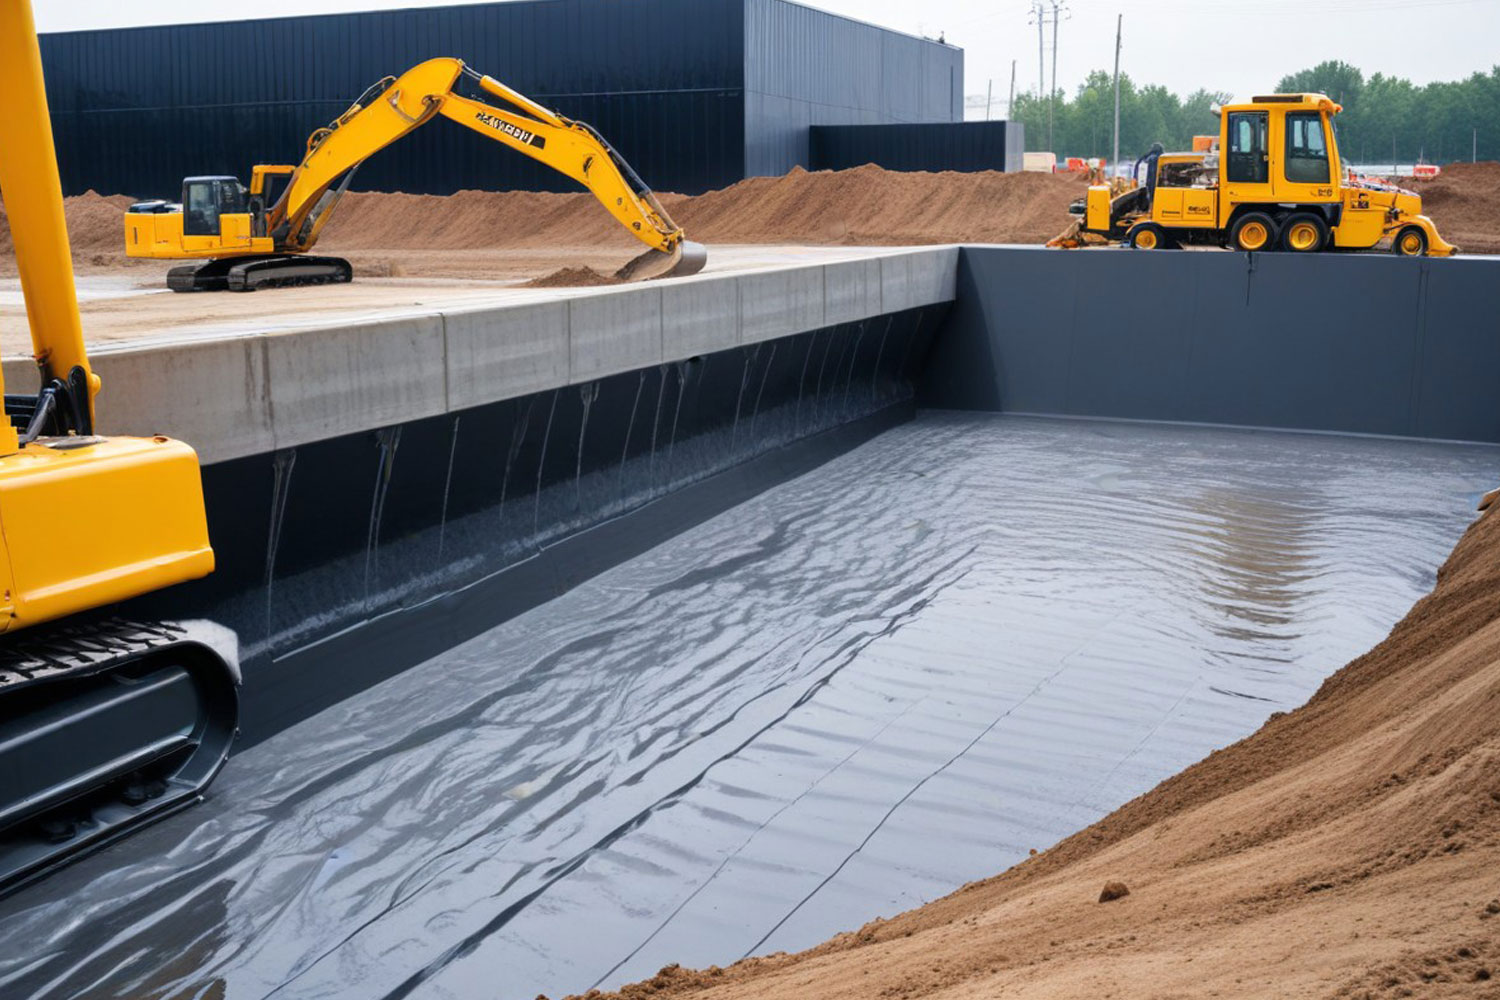 Dewatering in Construction: Managing Groundwater and Surface Water on Job Sites